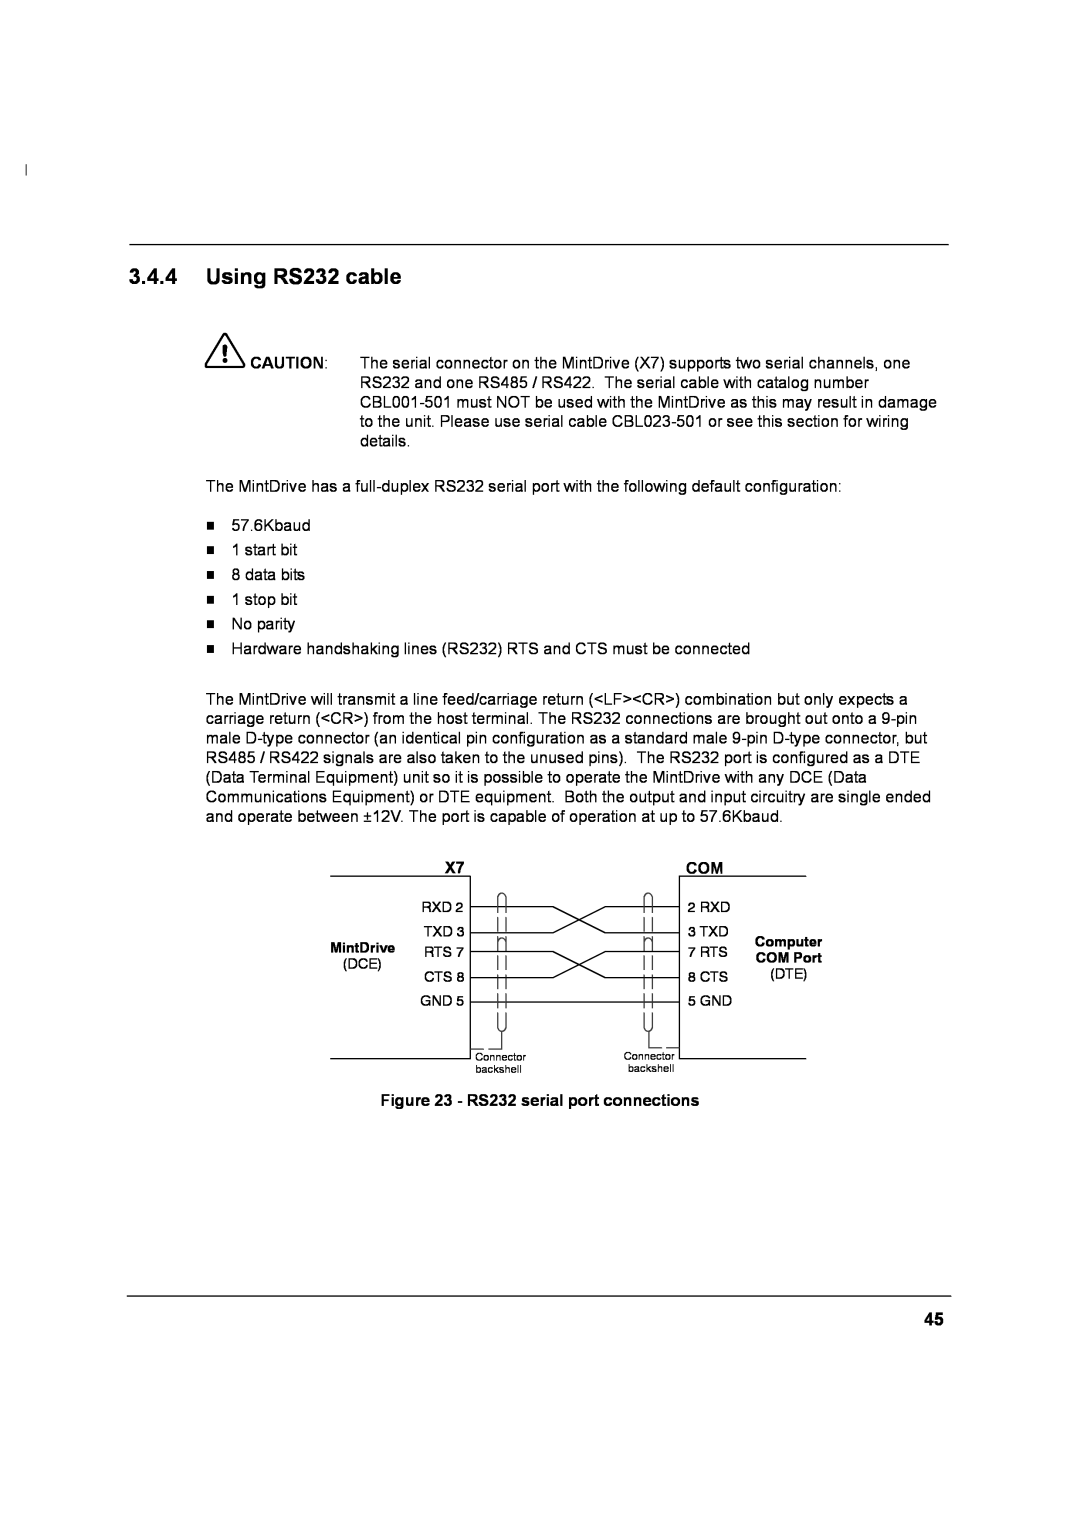 Baldor MN1274 06/2001 installation manual Using RS232 cable, RS232 serial port connections 